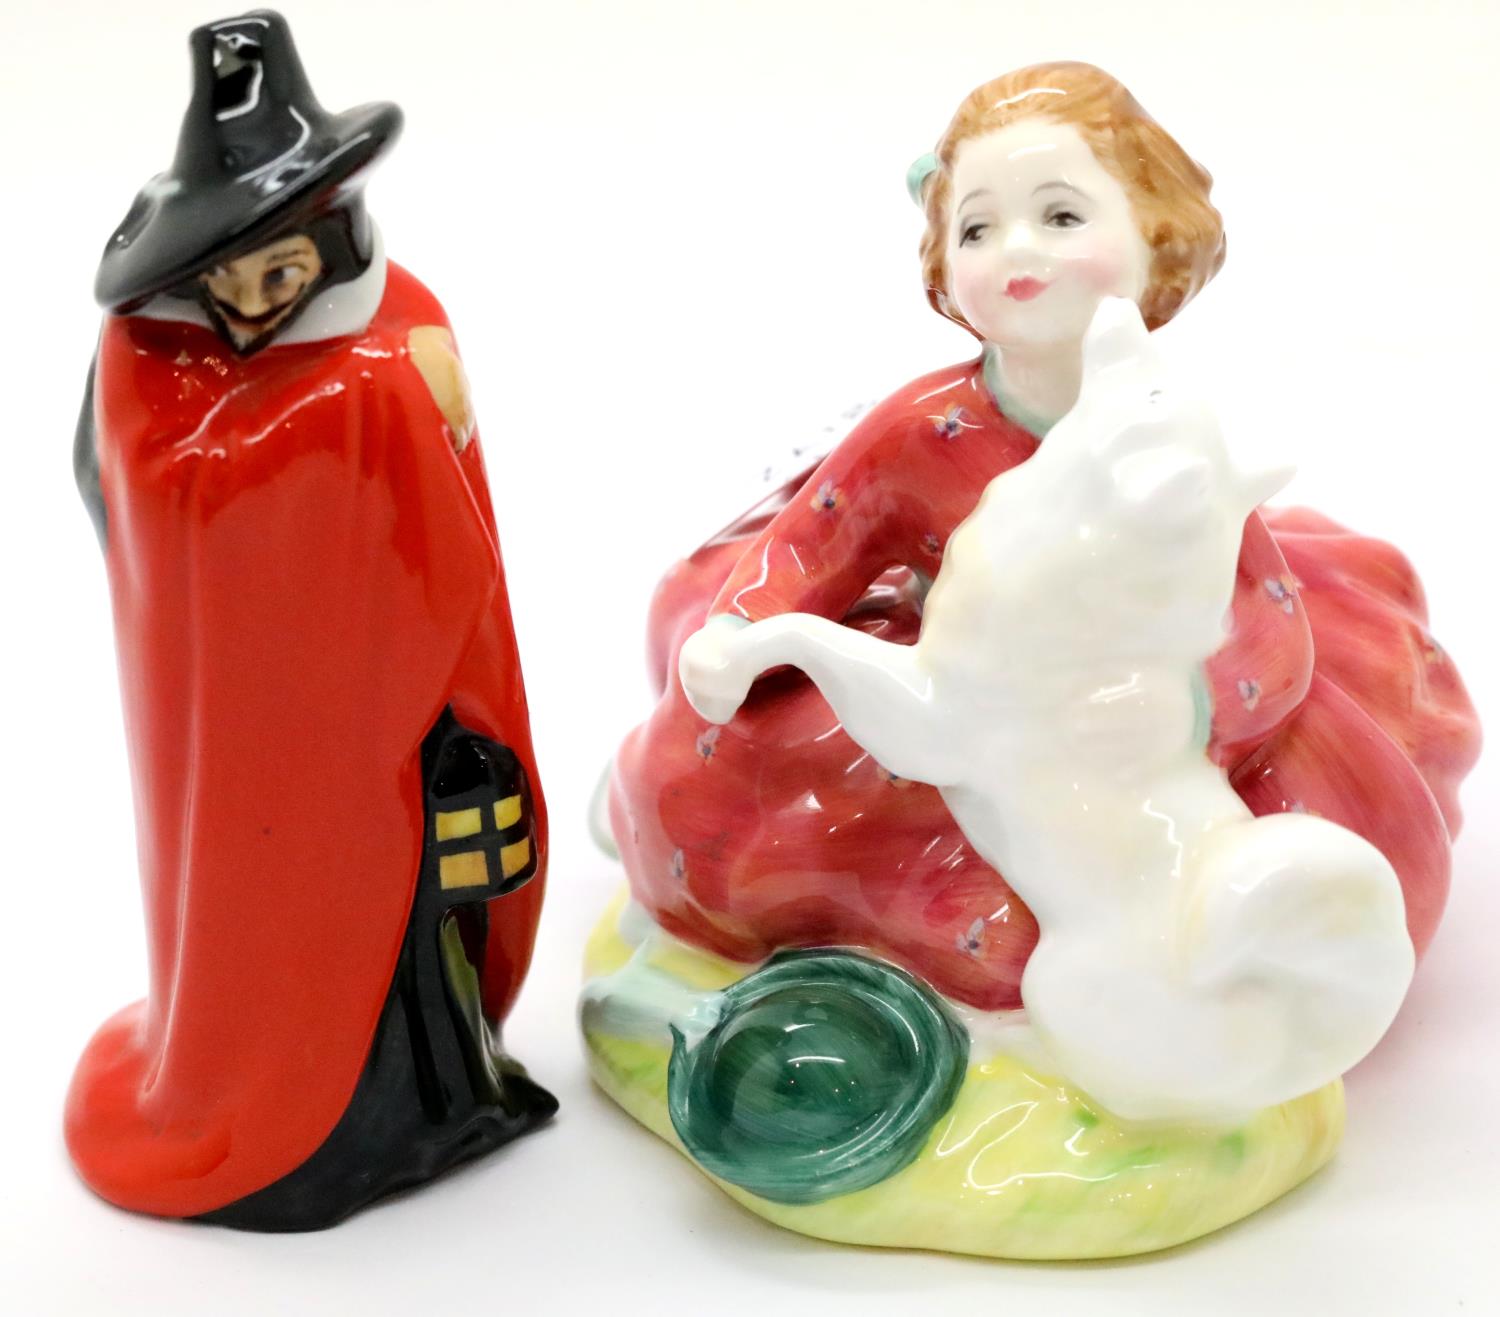 Royal Doulton Guy Fawkes figure and Home again figurine. P&P Group 1 (£14+VAT for the first lot